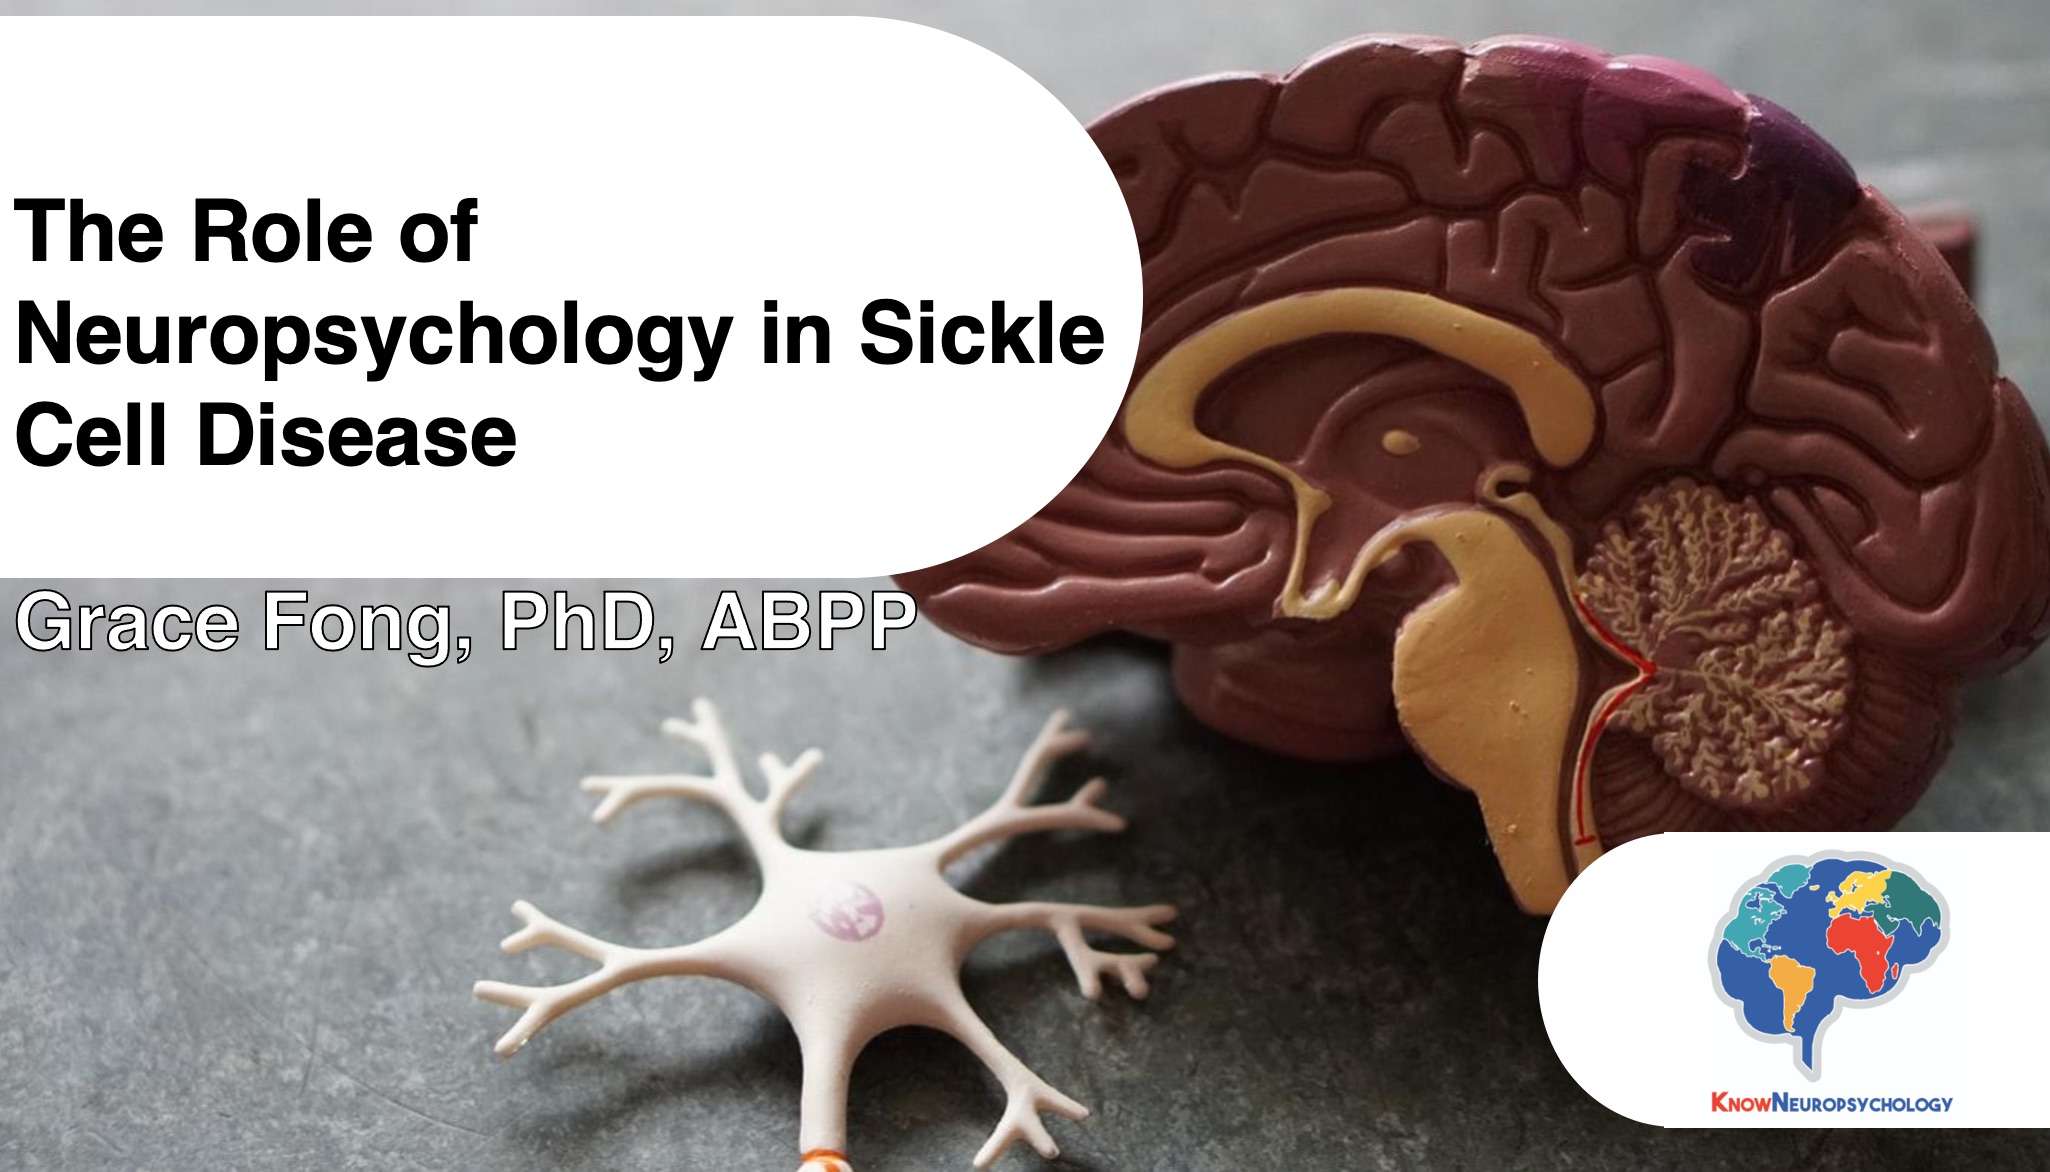 The Role of Neuropsychology in Sickle Cell Disease with Dr. Grace Fong